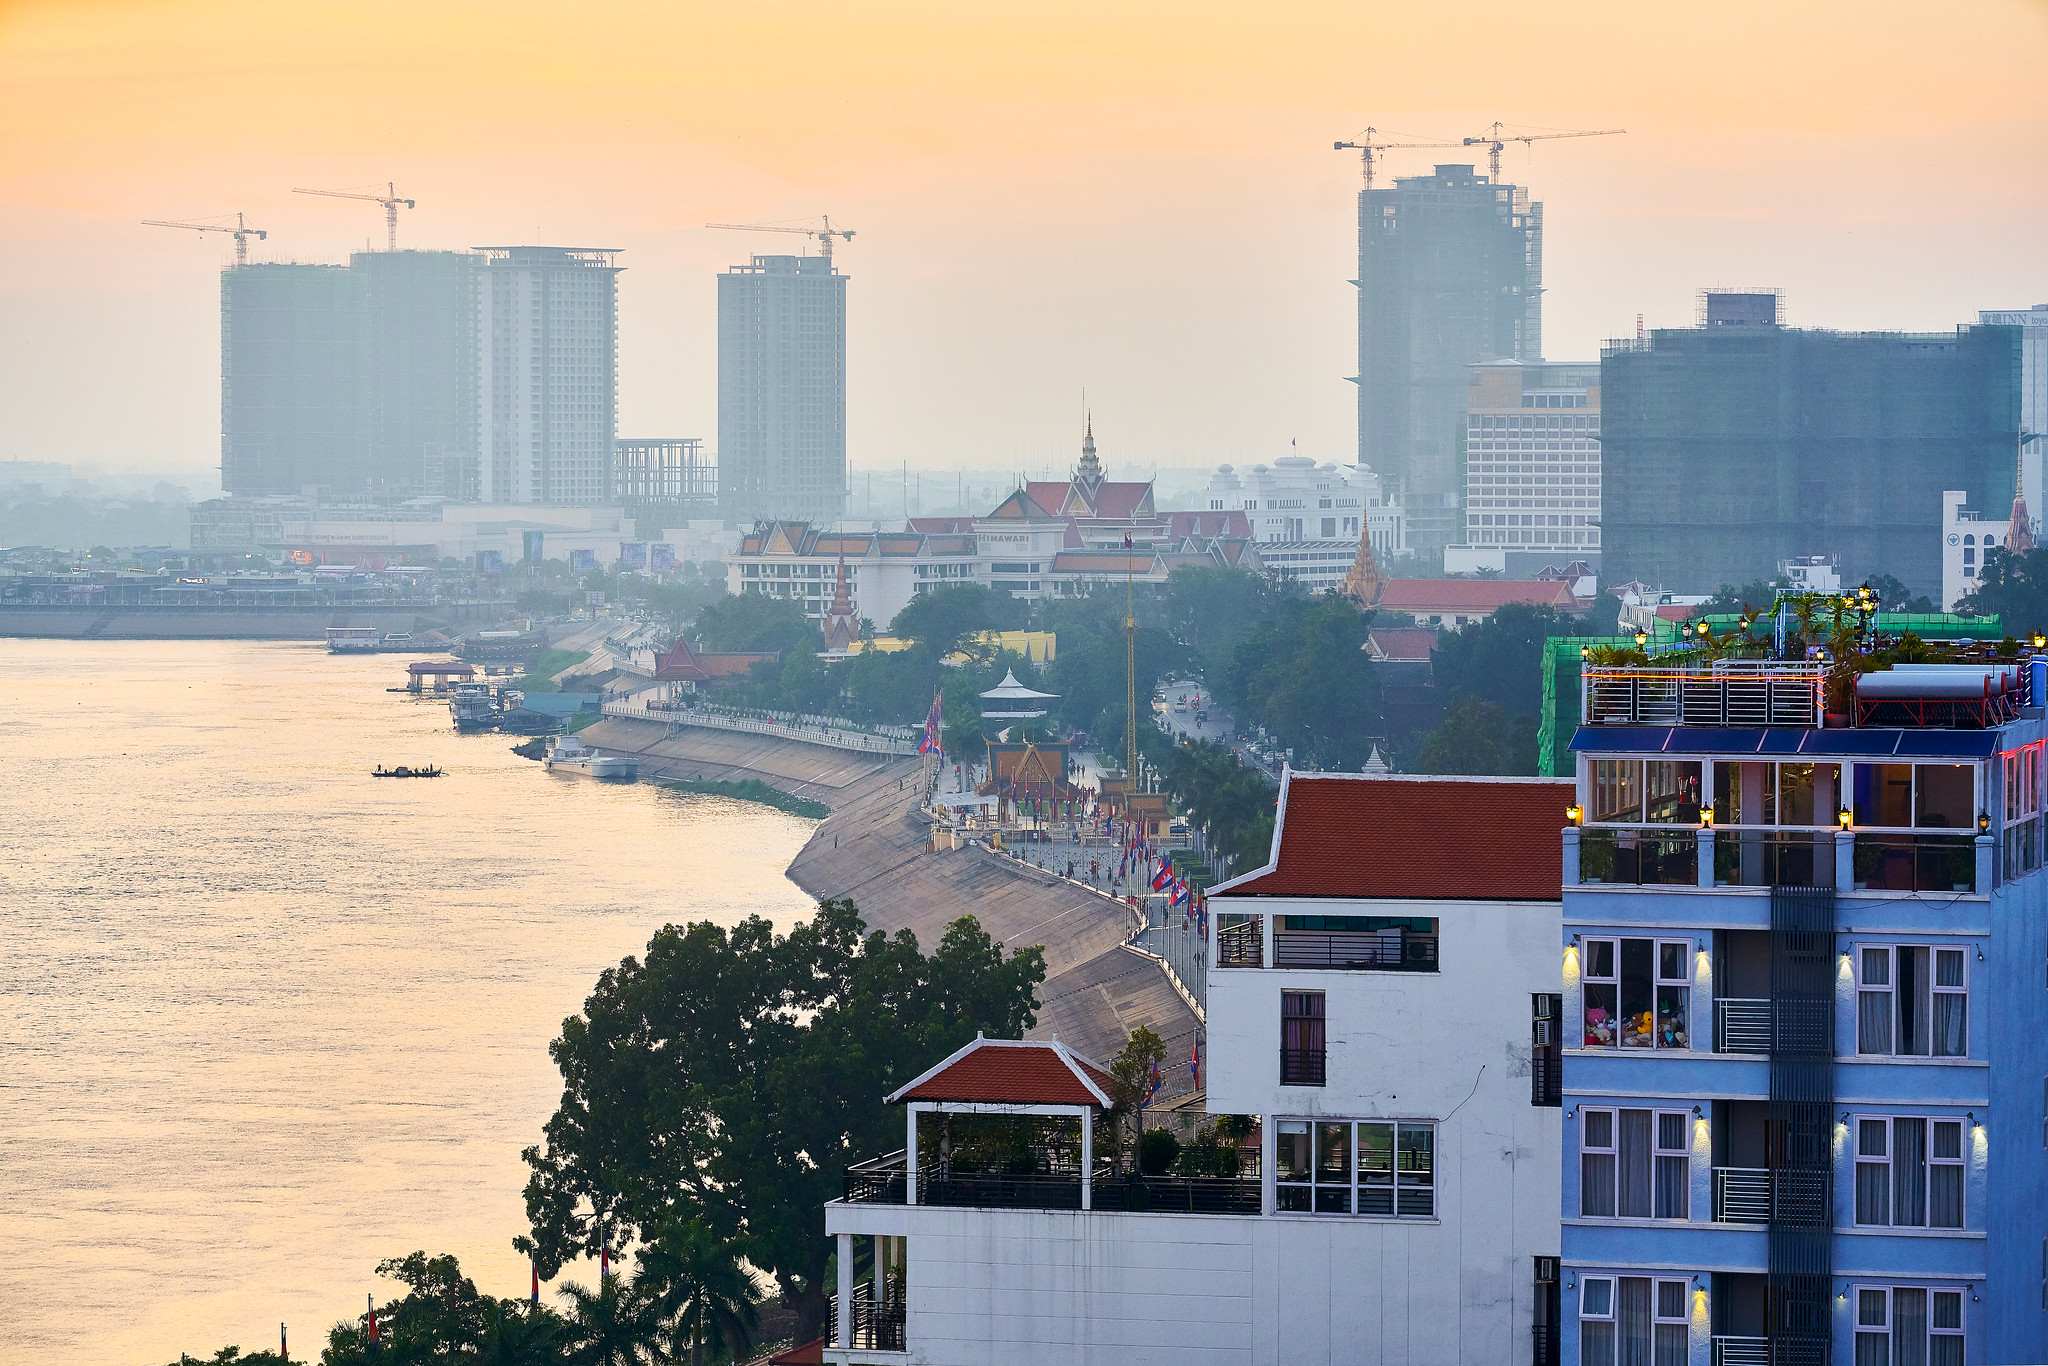 Singaporean start-up to use blockchain technology to build smart city in Phnom Penh